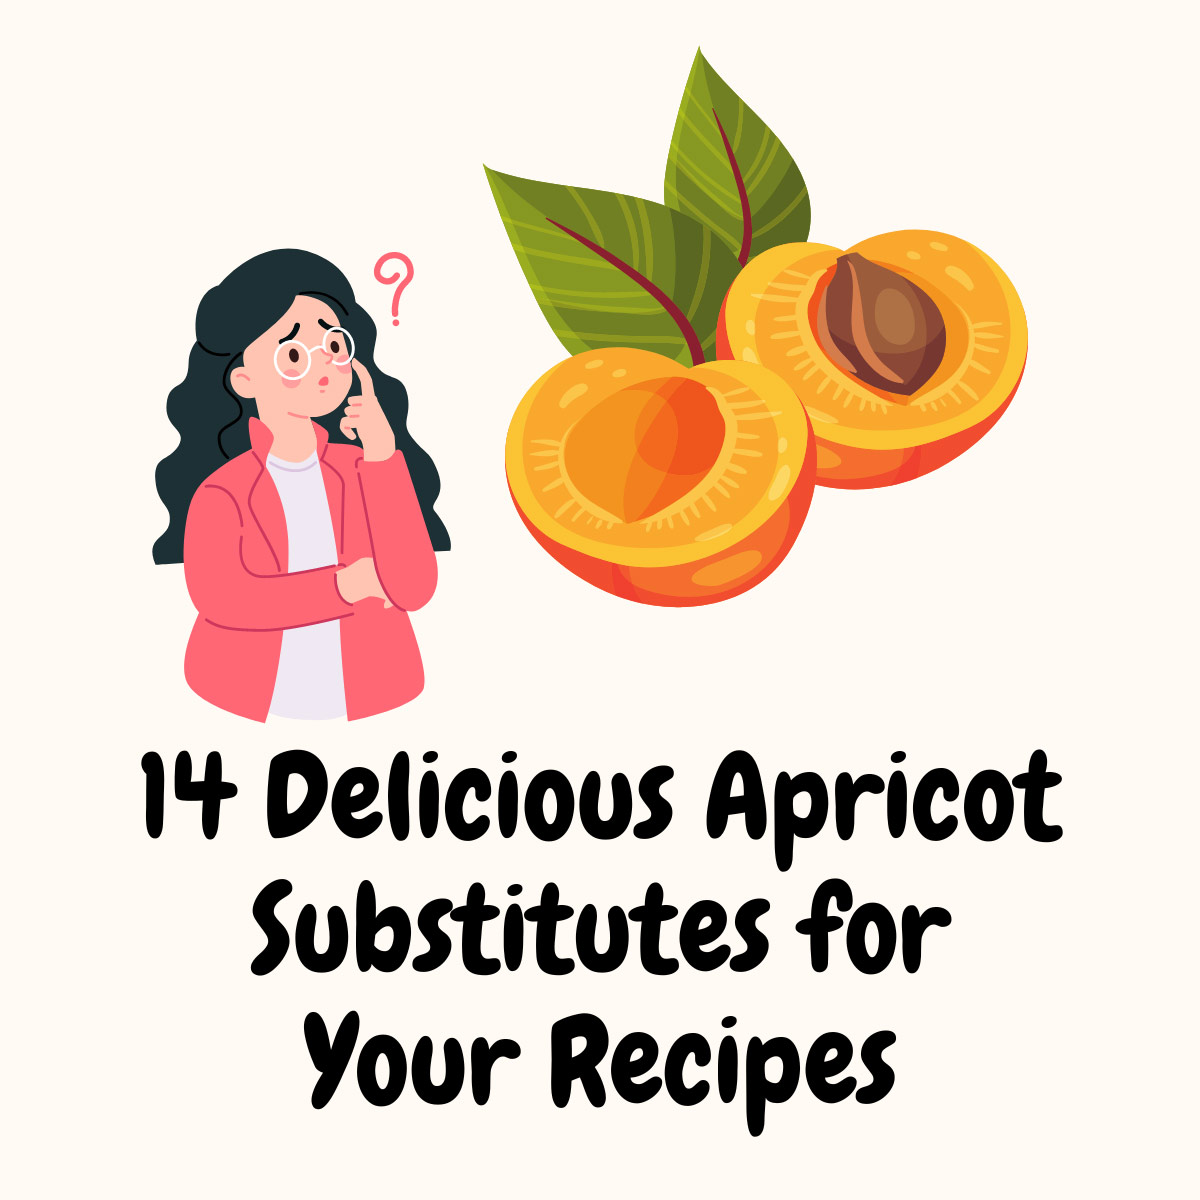 Apricot Substitutes for Your Recipes featured image | Girl Meets Food